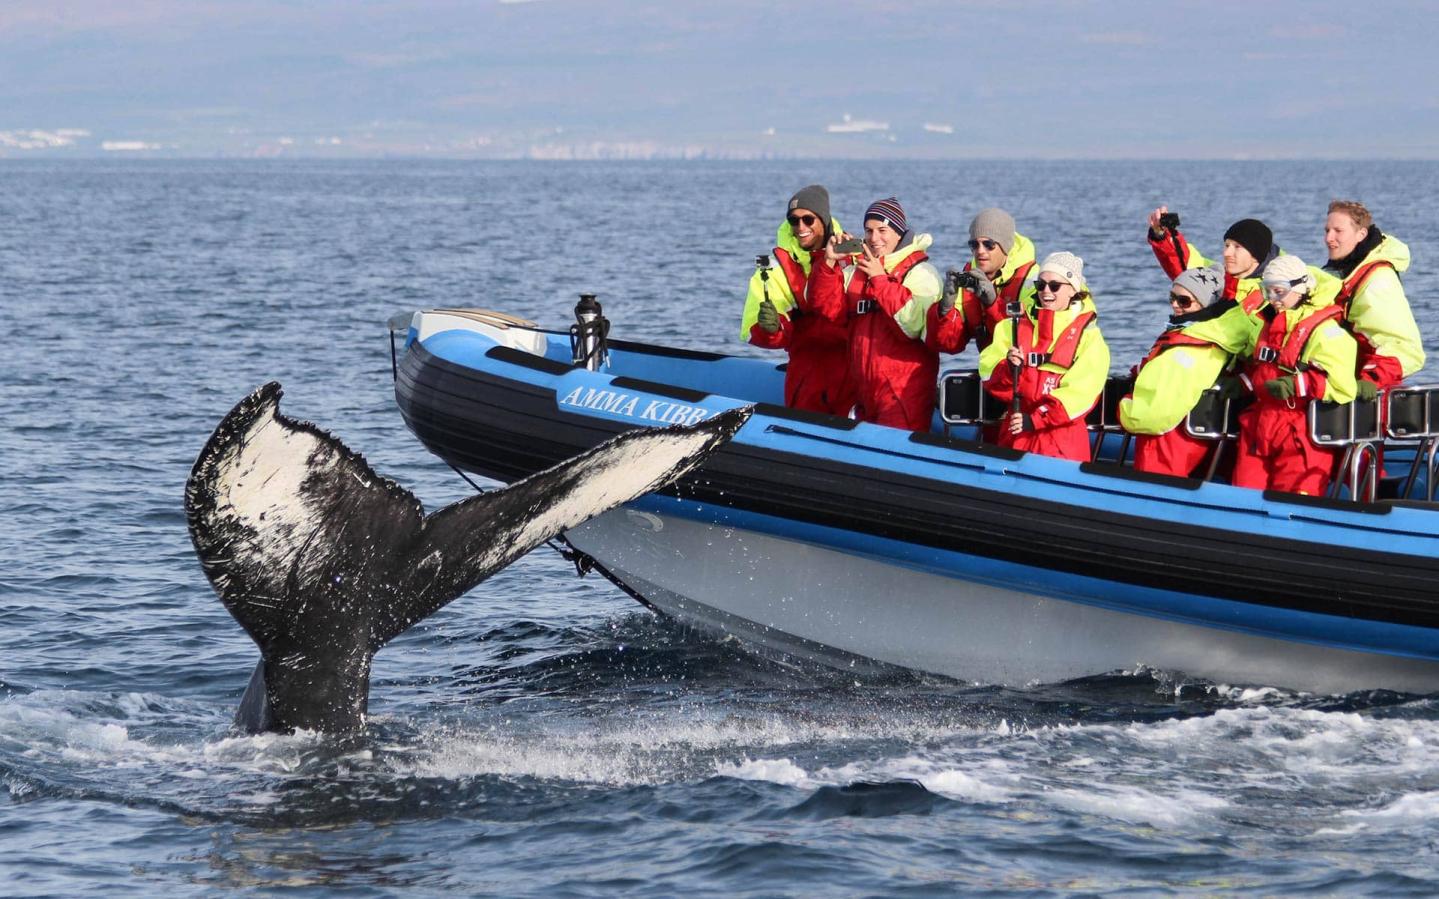 What Should I Look for When Choosing a Whale Watching Tour?